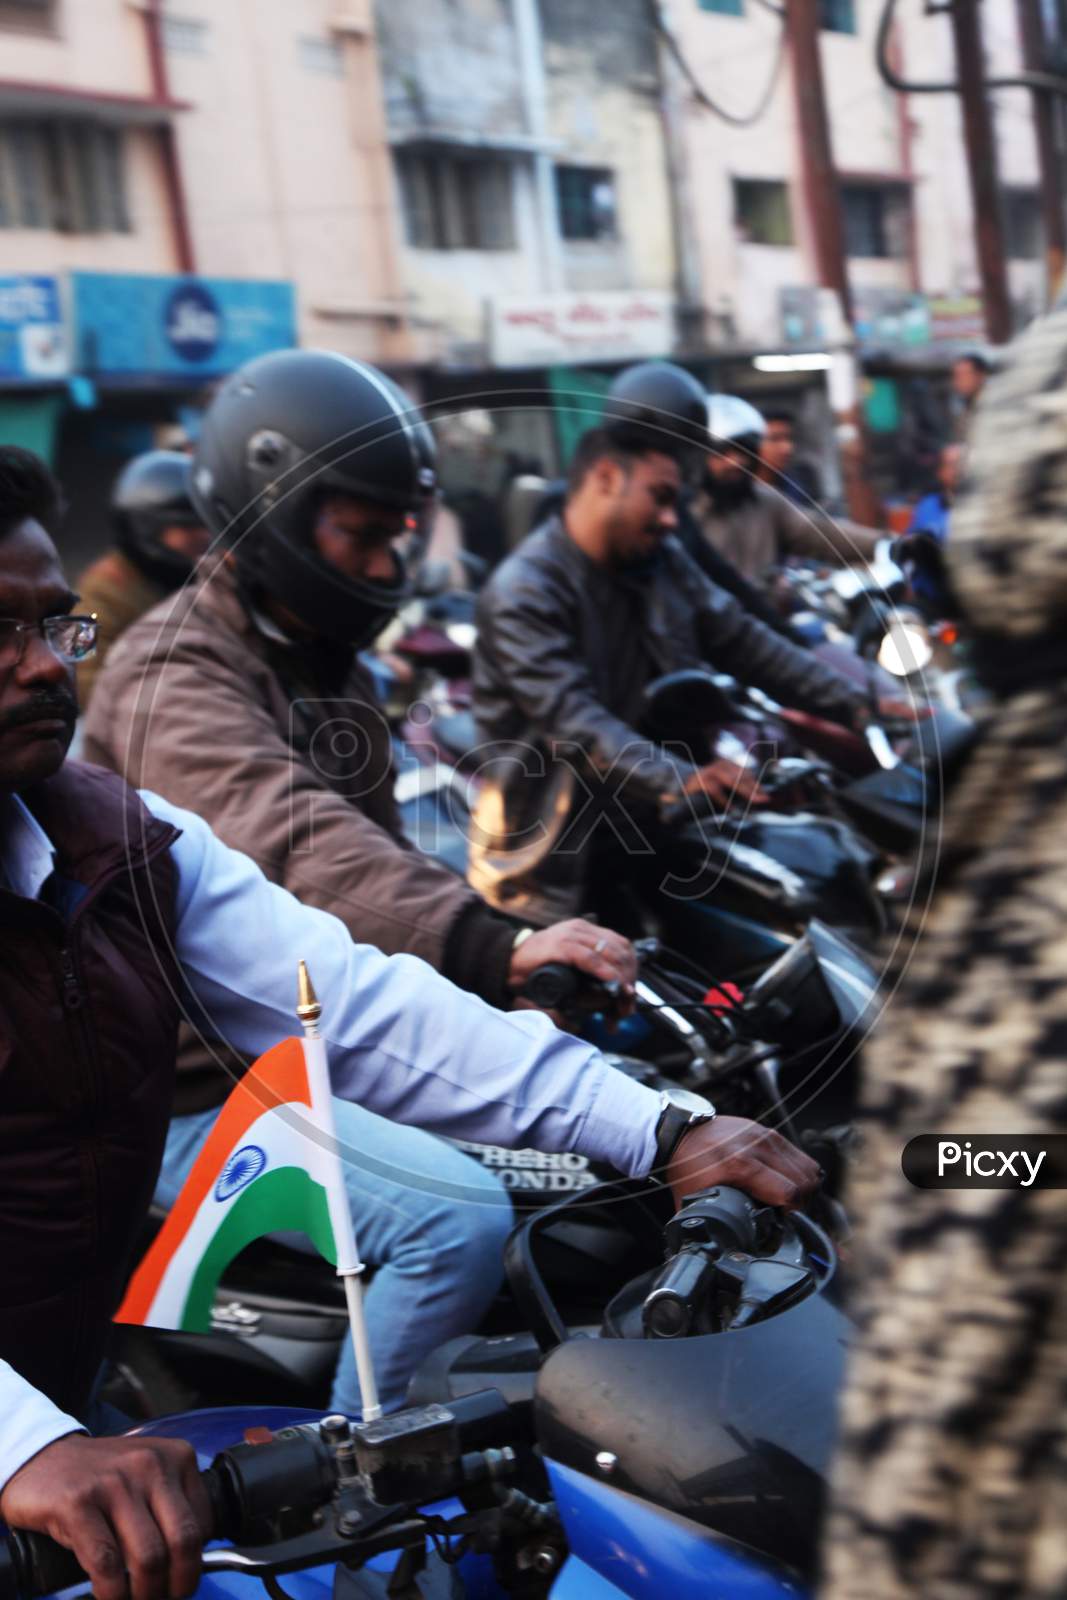 A man riding a bike with Indian Flag on the Bike